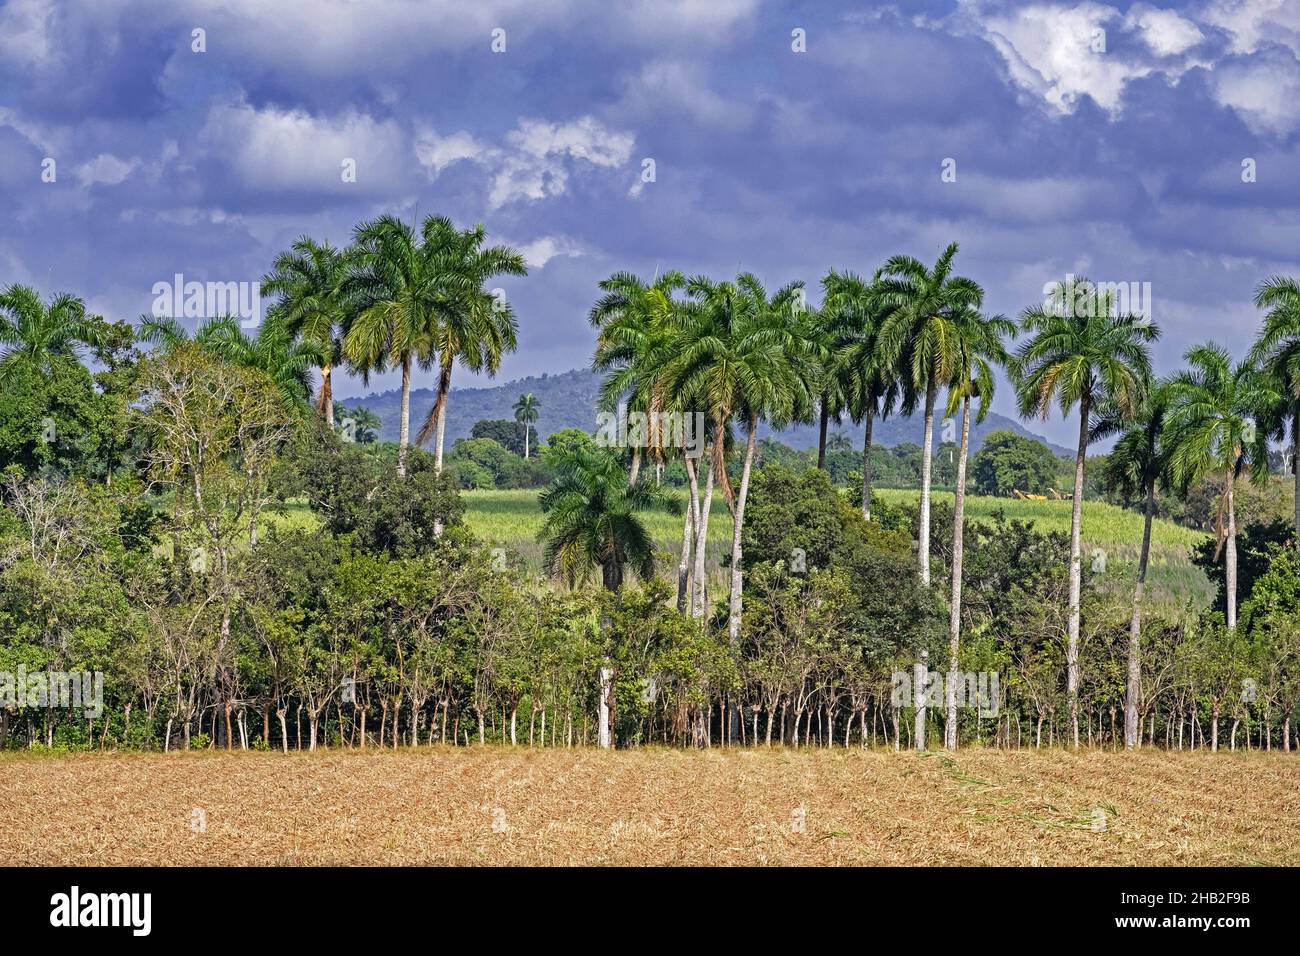 Farmland and palm trees along the Carretera Central / CC / Central Road, west-east highway, Sancti Spíritus Province on the island Cuba, Caribbean Stock Photo